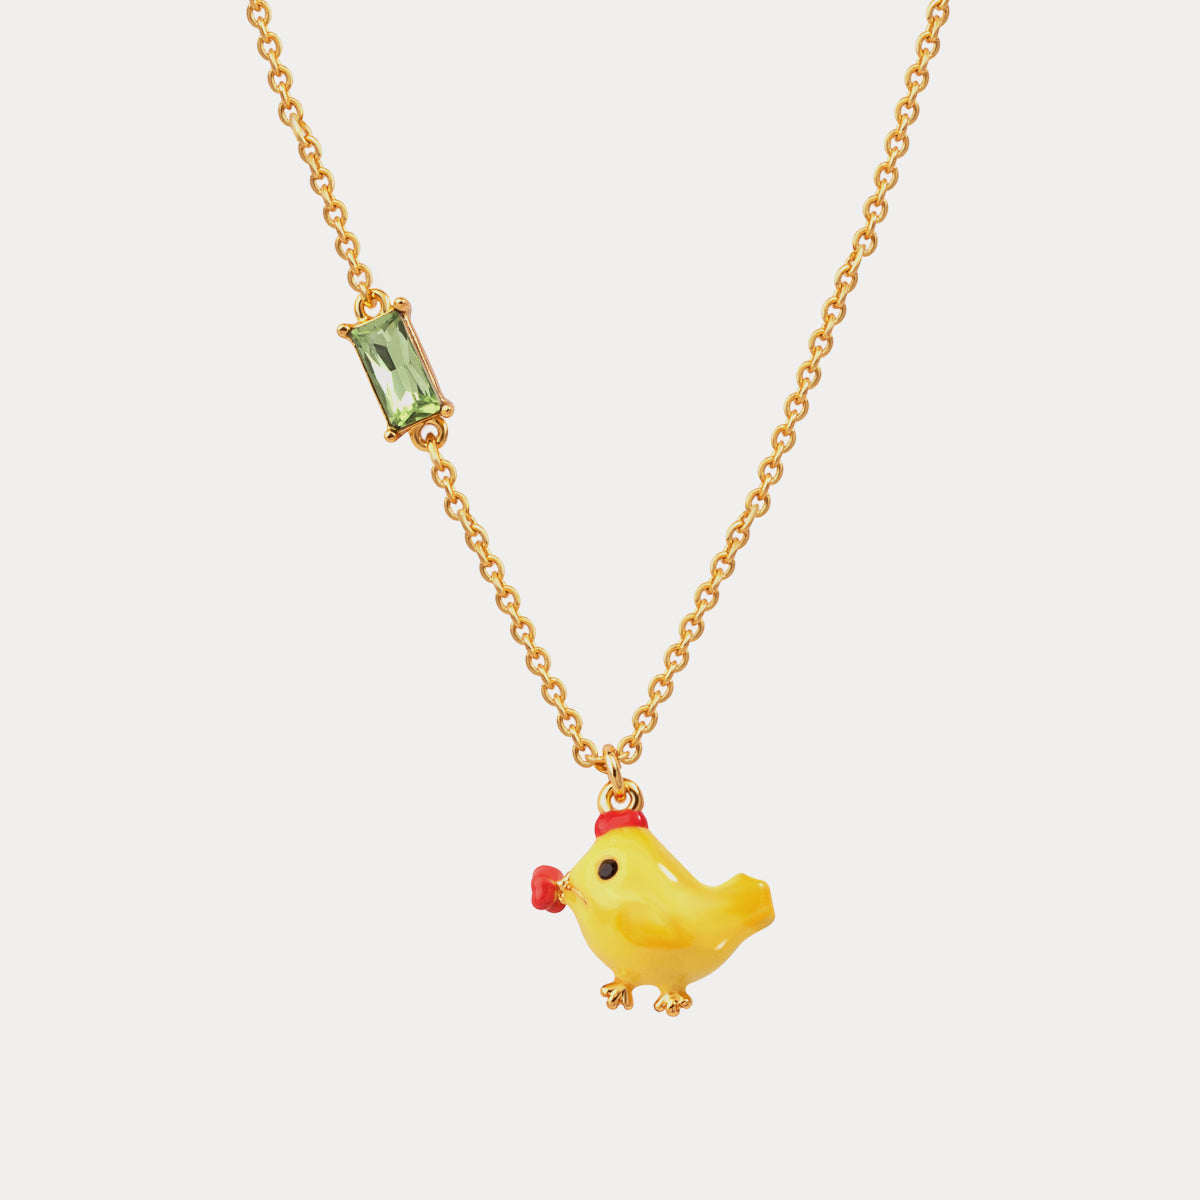 Selenichast little chick necklace